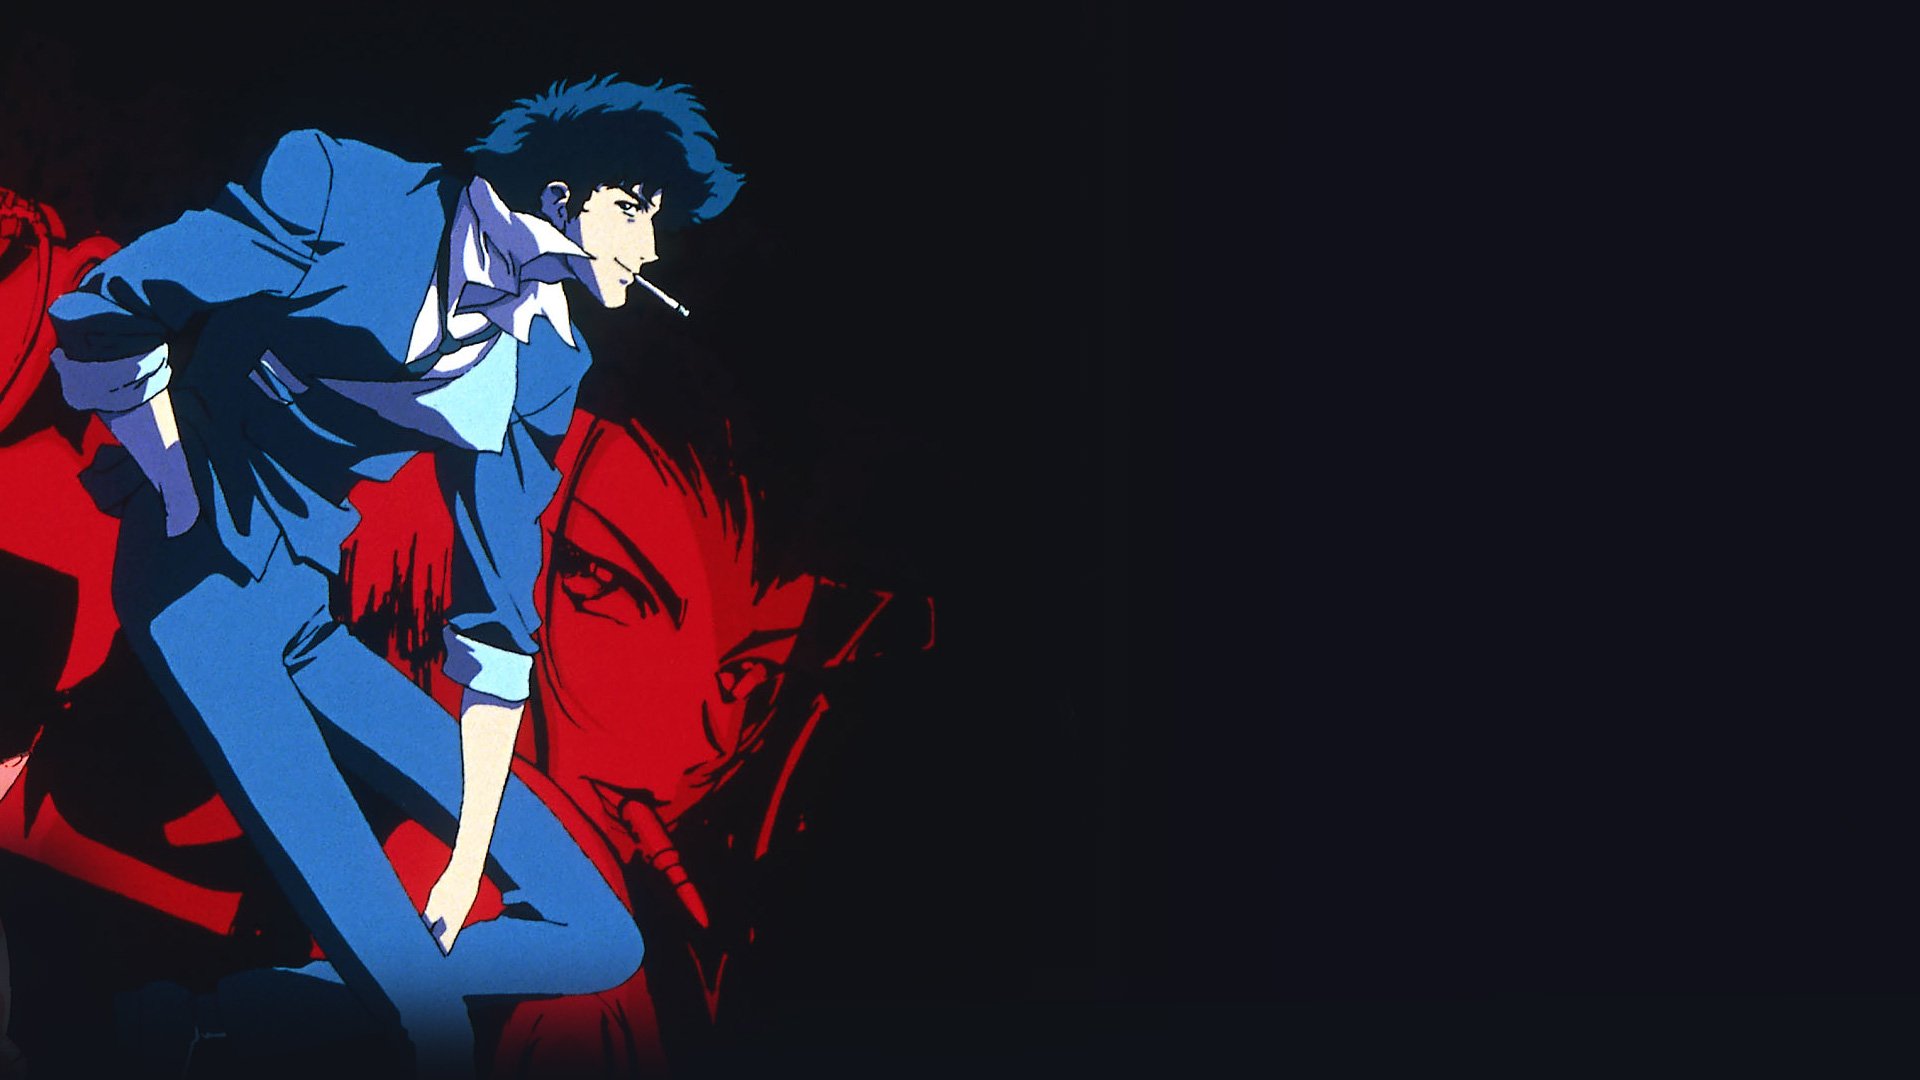 Download free Cowboy Bebop Widescreen Wallpapers 103979 available in differ...